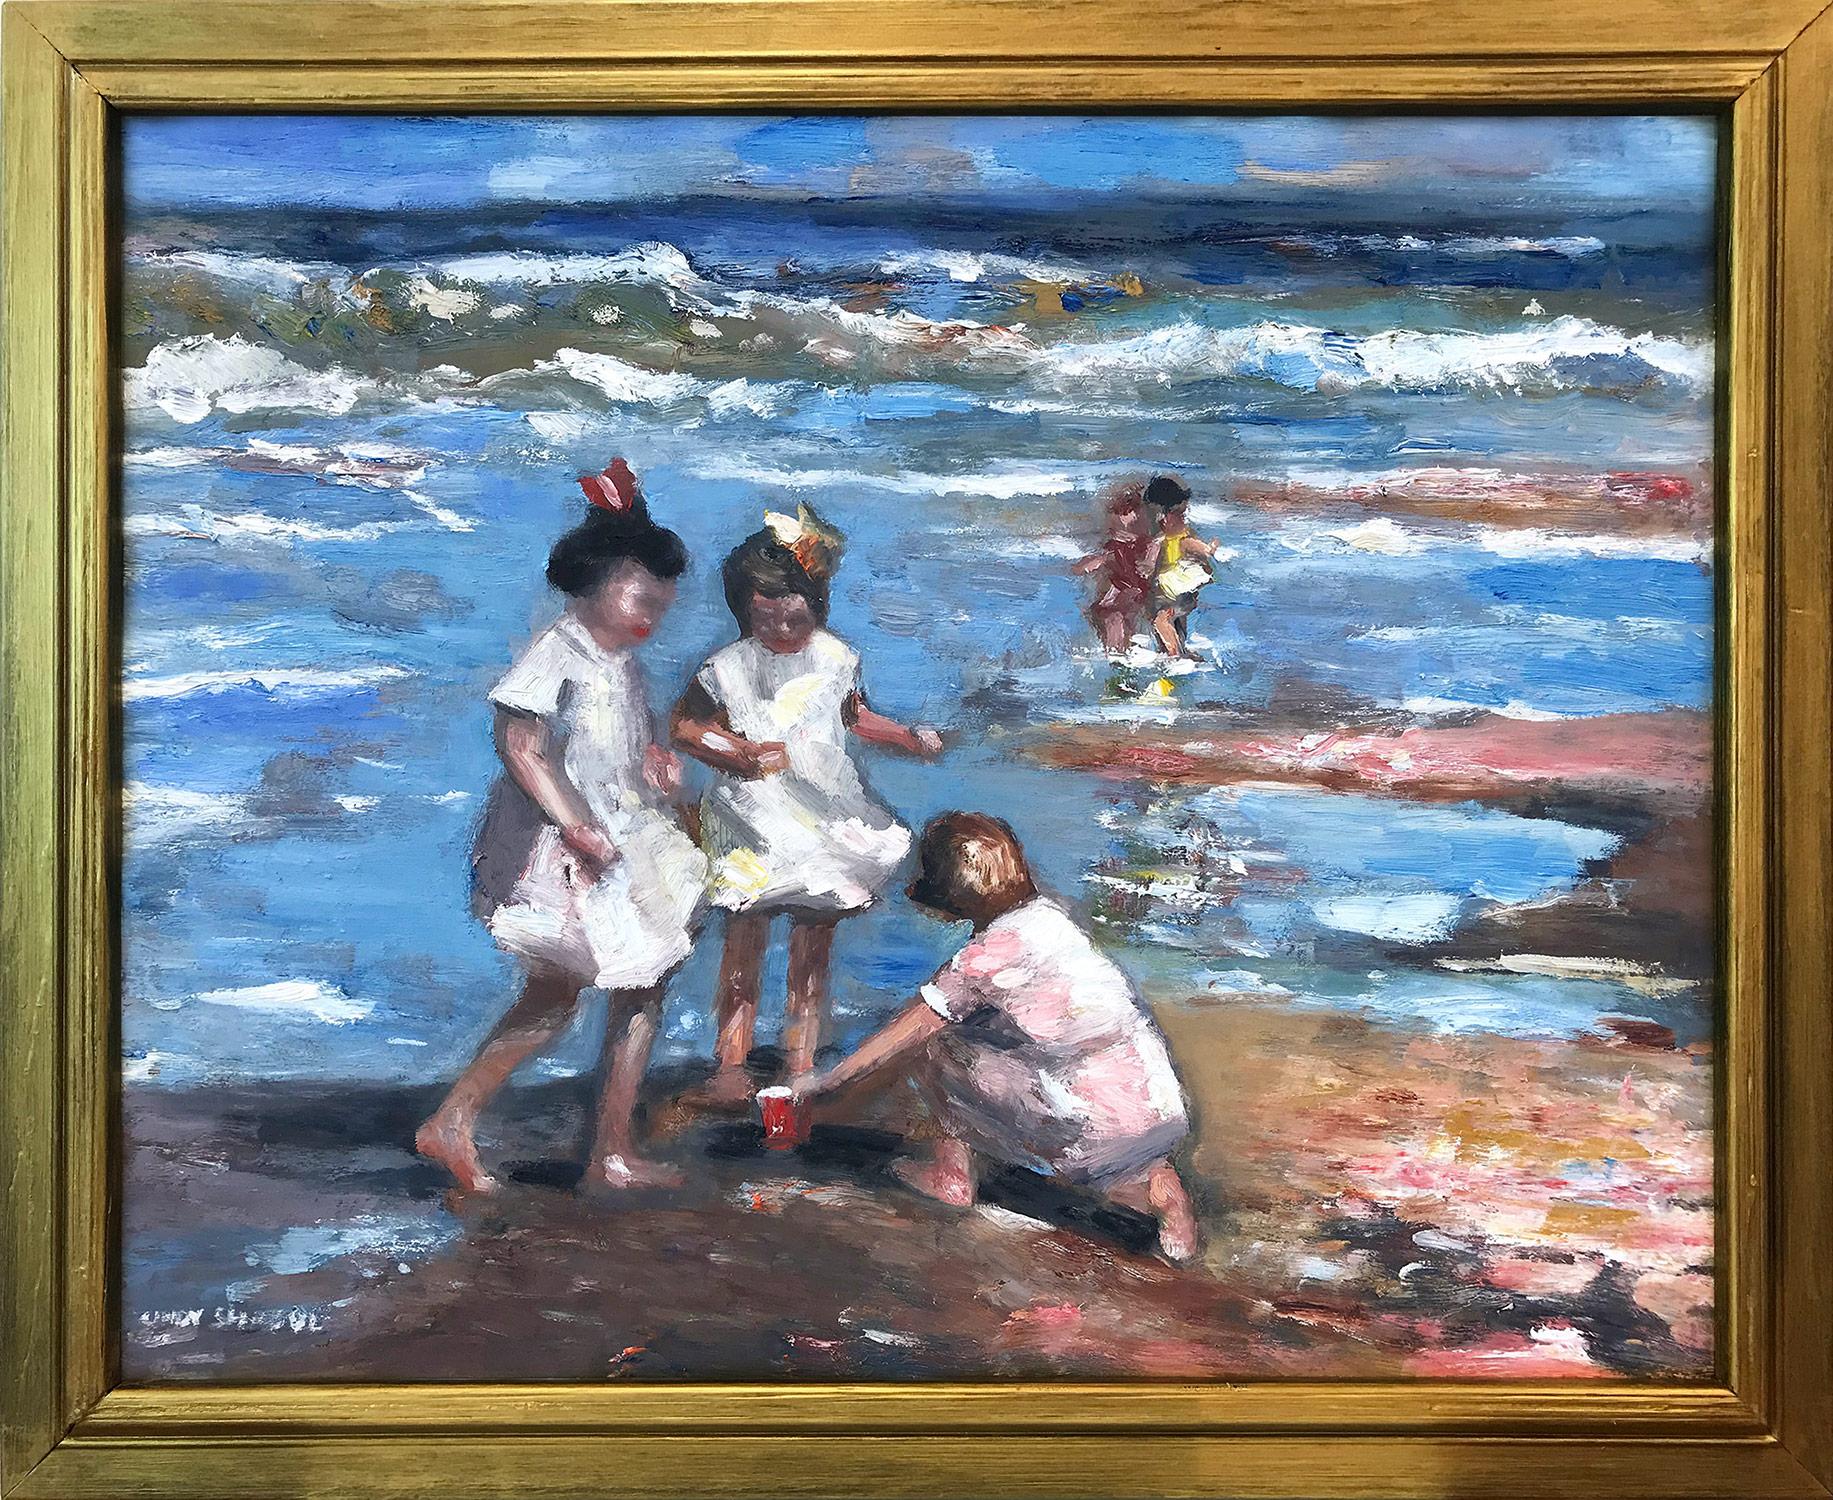 Cindy Shaoul Figurative Painting - "Kids on the Beach" Colorful Impressionistic Beach Scene Oil Painting on Panel